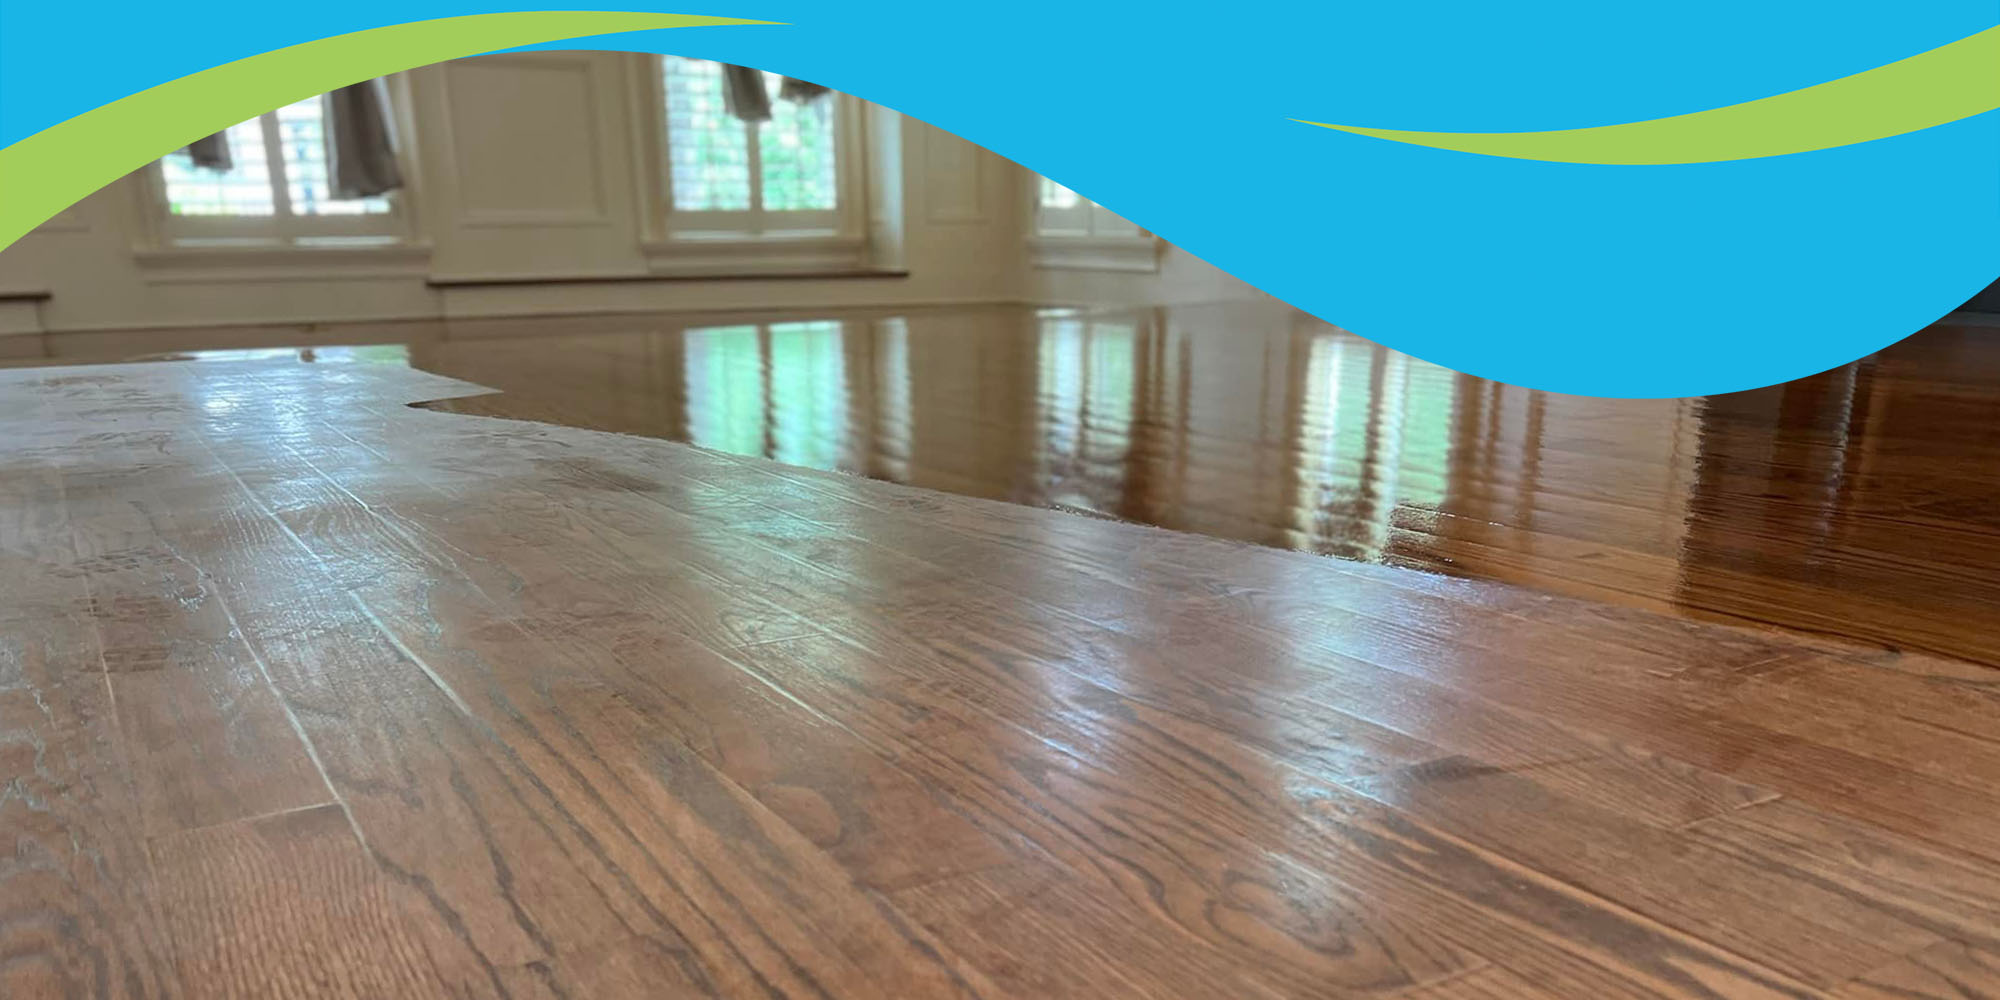 Hardwood Floor Refinishing in St Louis MO, O'fallon IL, and Surrounding Areas